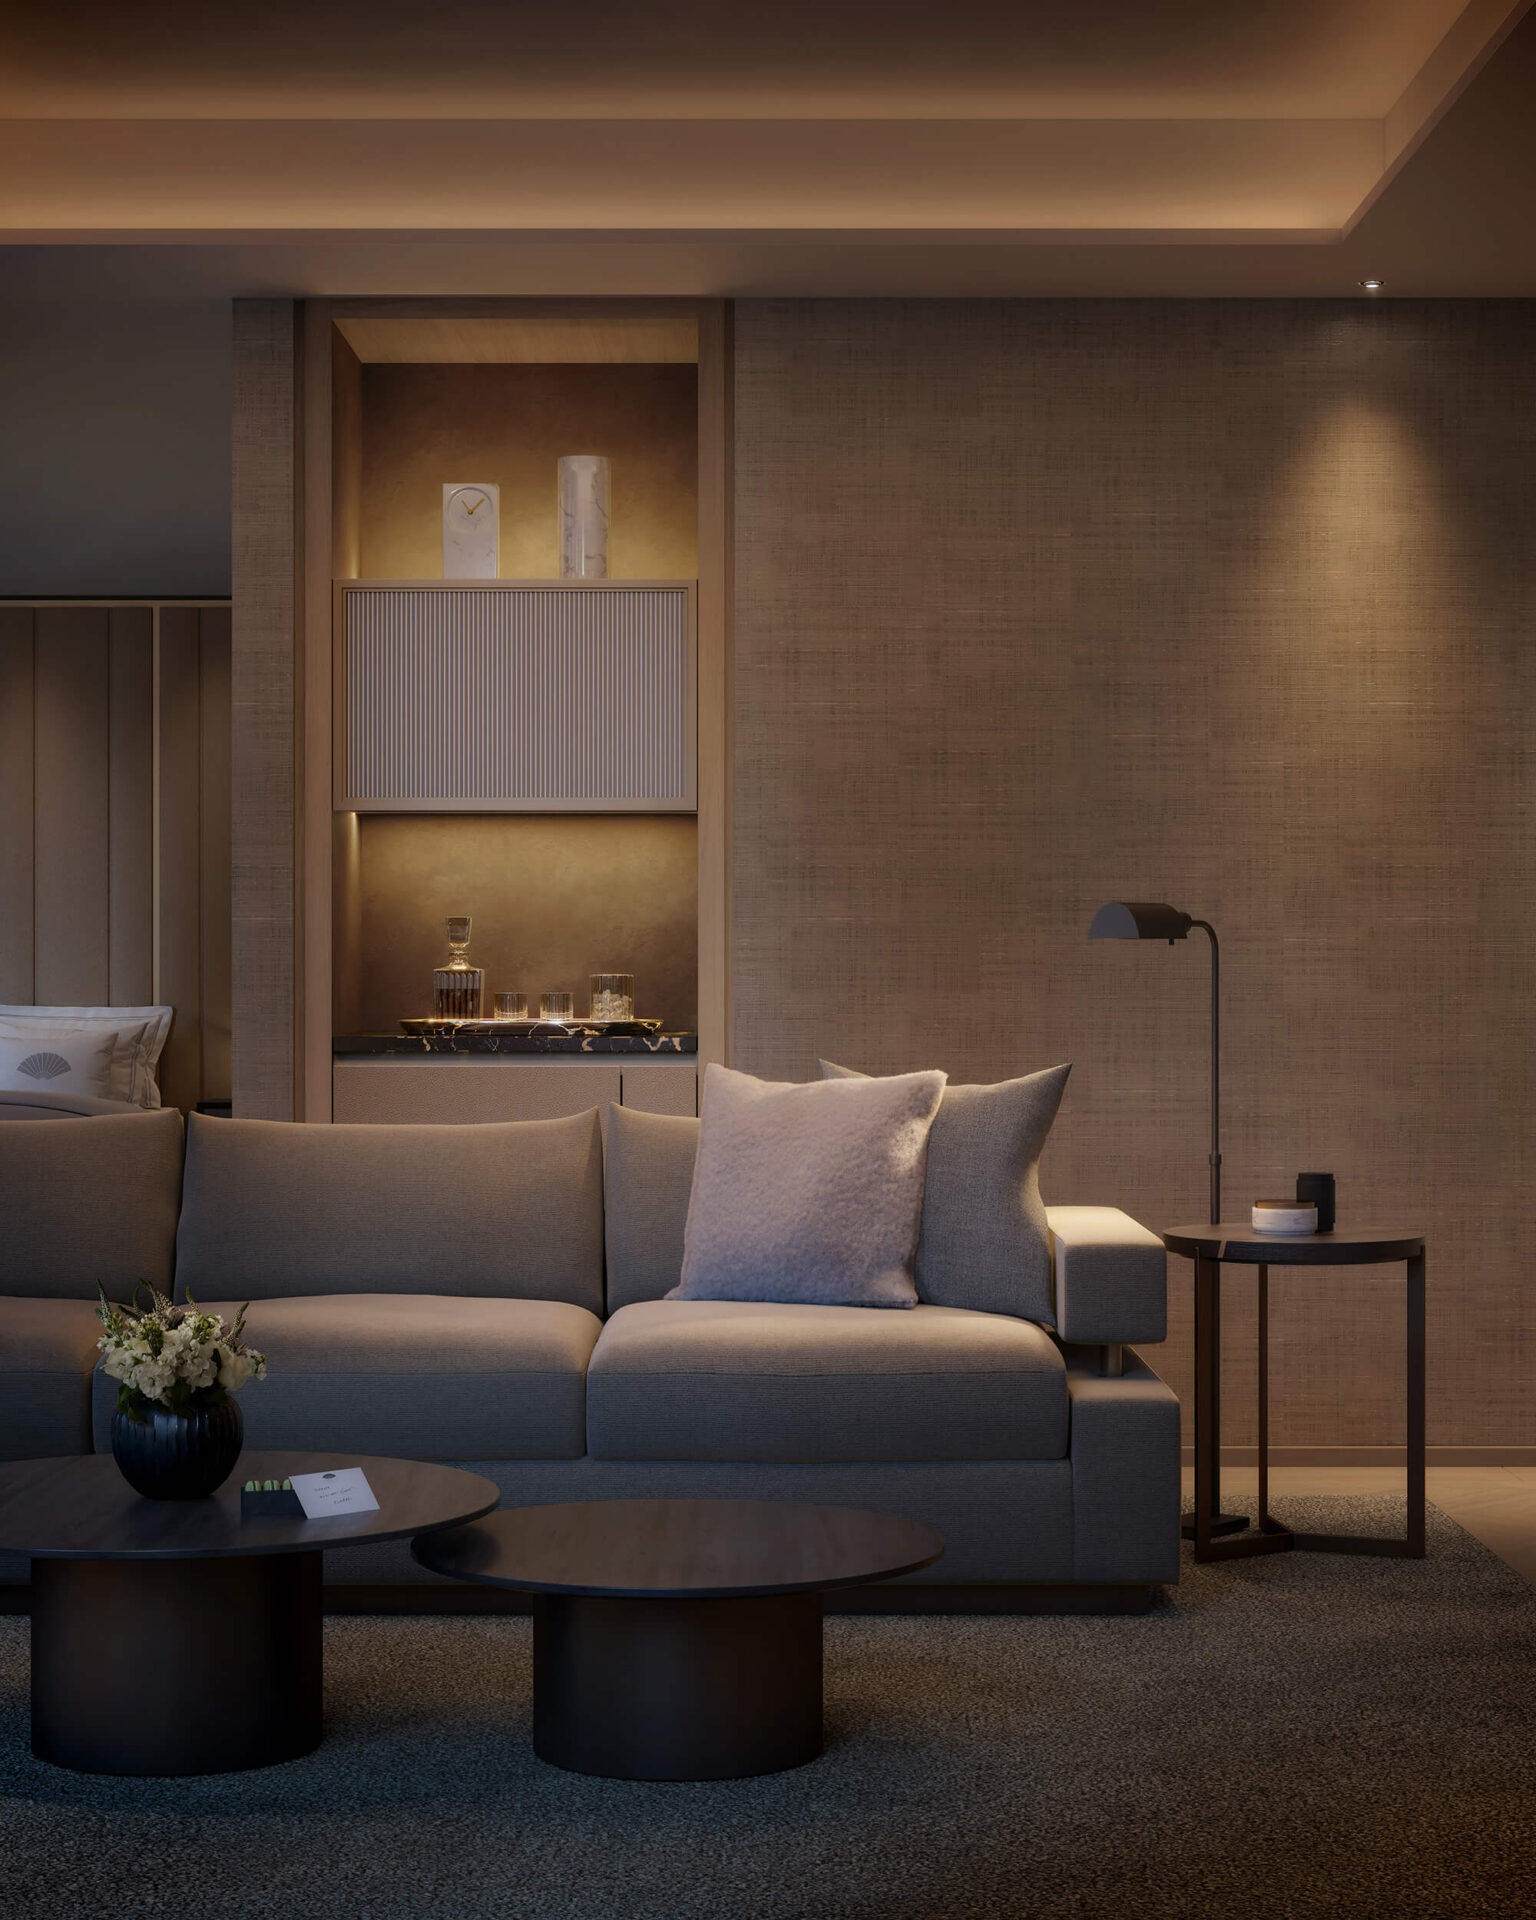 mandarin oriental 5th ave rendering of a living room with a couch, coffee table and bar